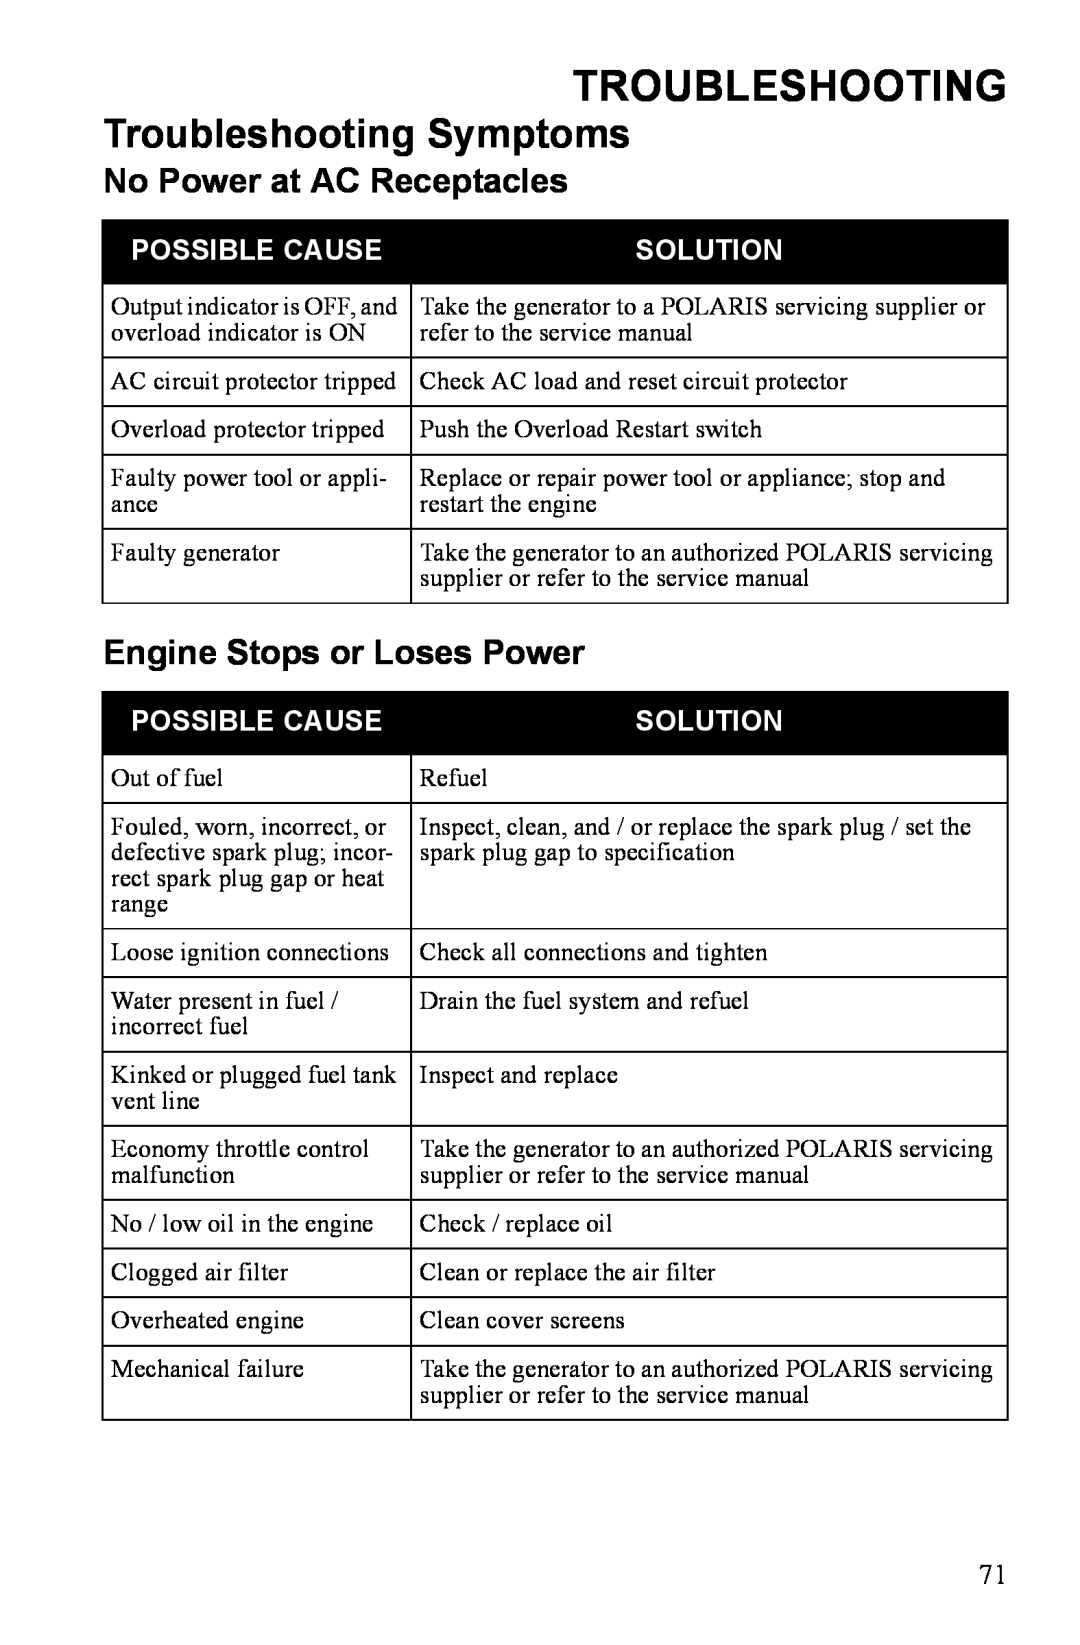 Polaris P3000iE manual Troubleshooting, No Power at AC Receptacles, Engine Stops or Loses Power, Possible Cause, Solution 